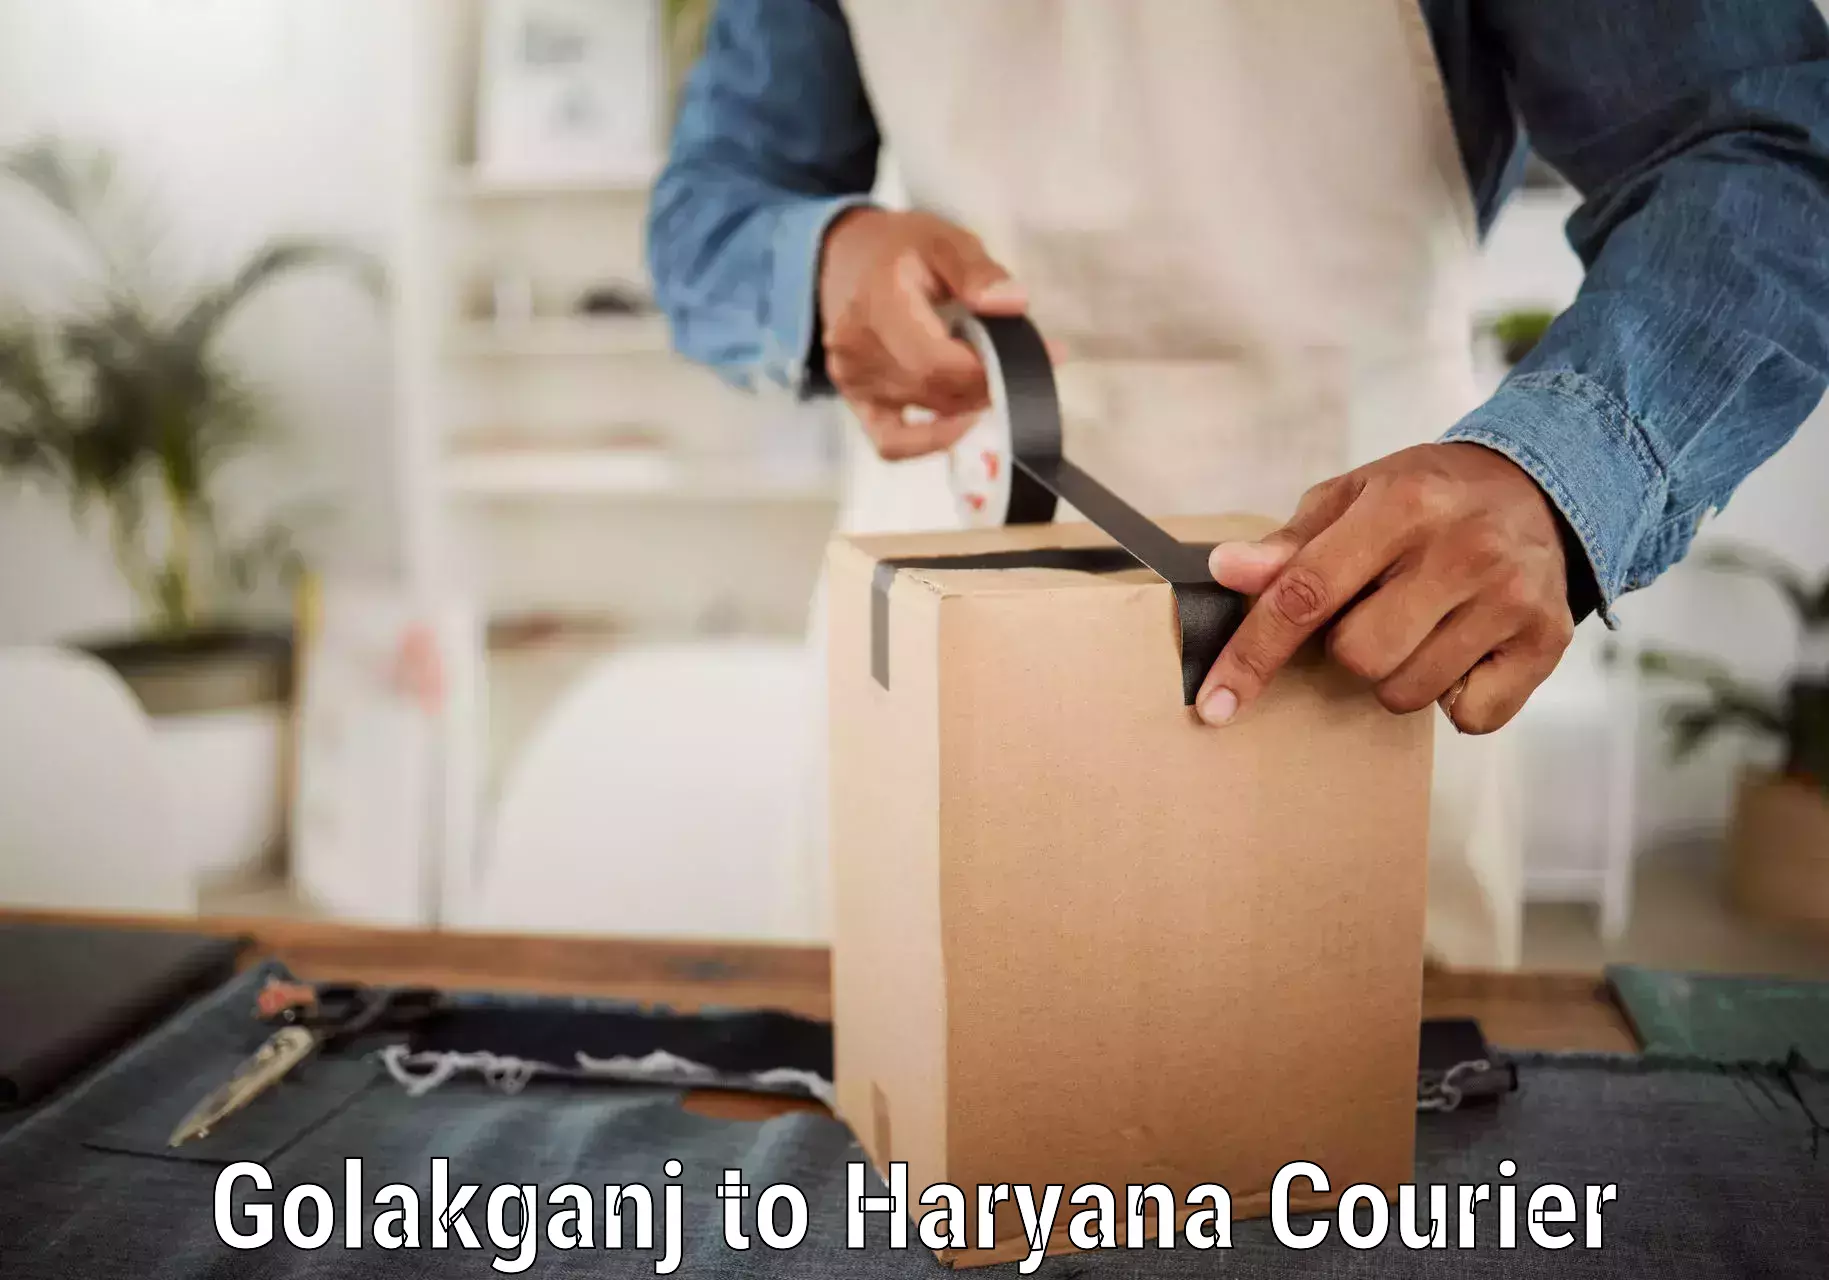 Courier service booking Golakganj to Faridabad